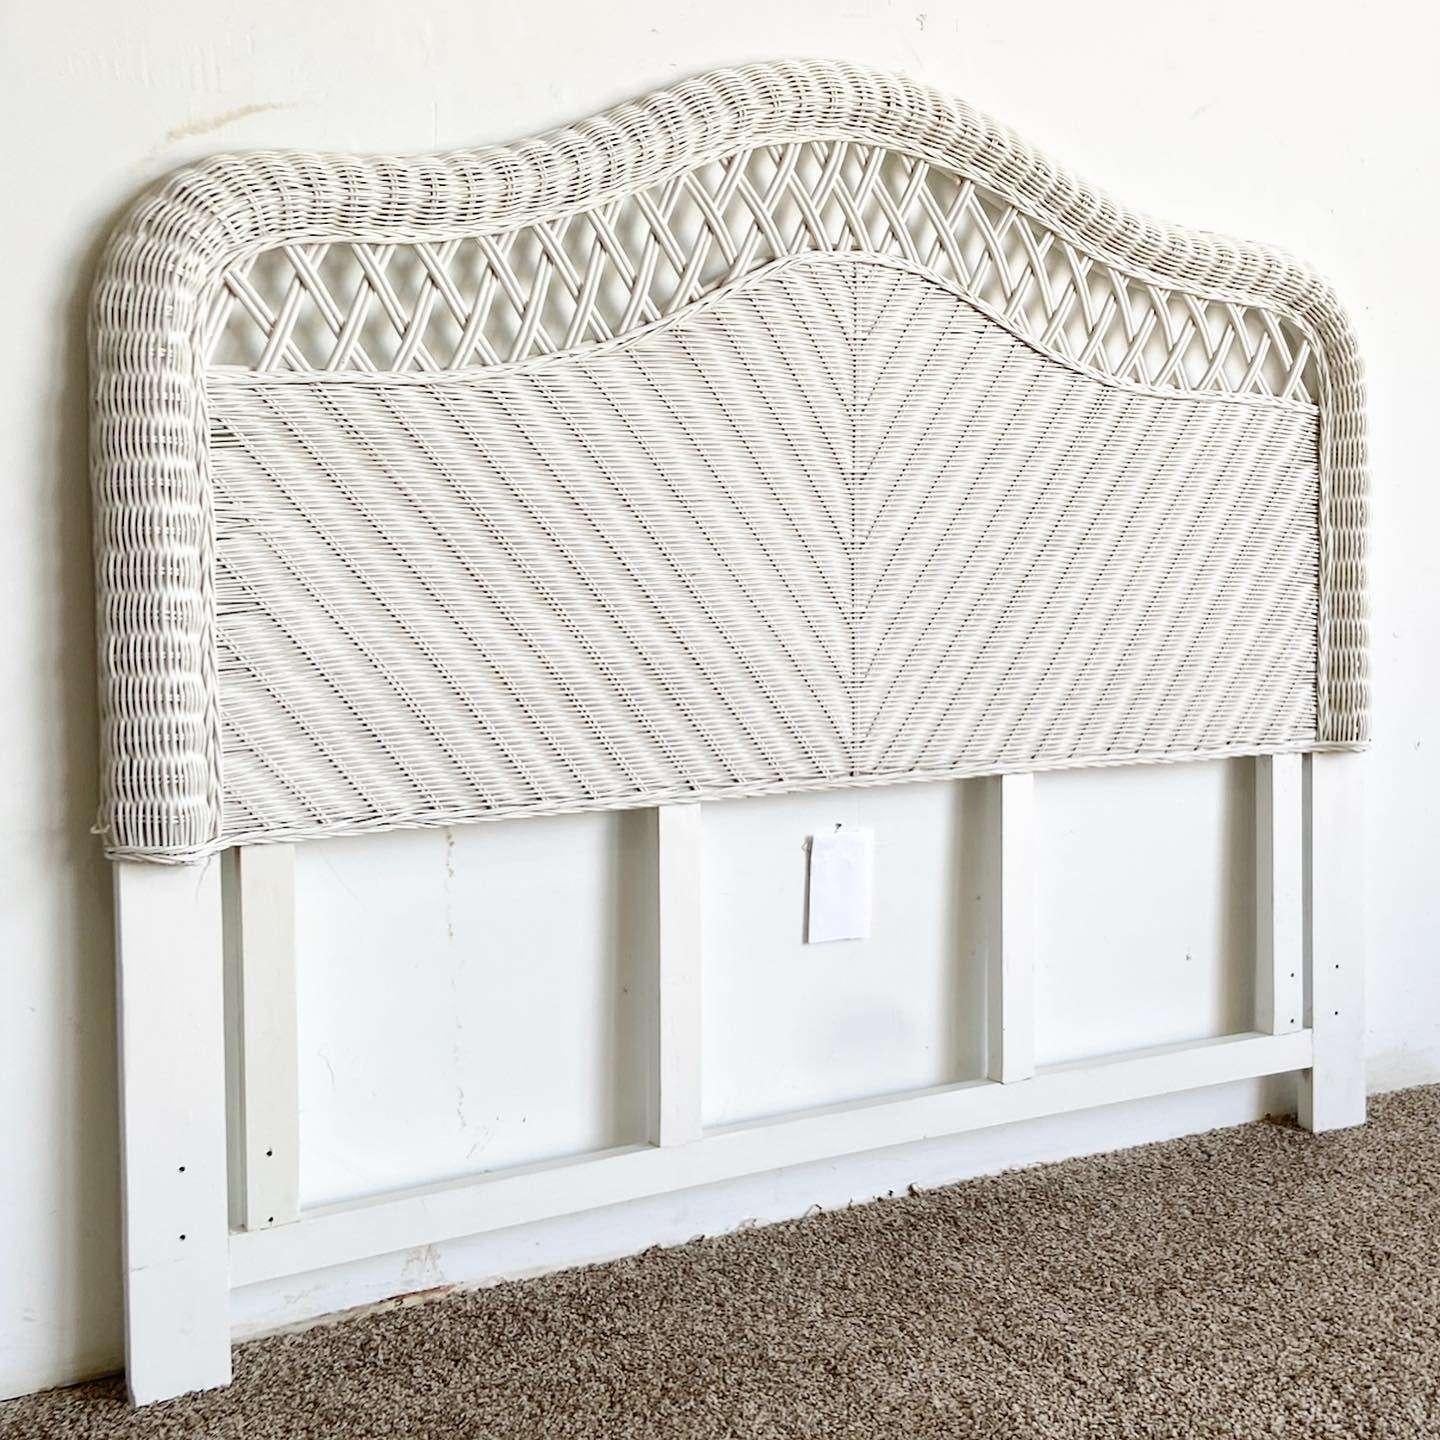 Exceptional vintage boho chic queen size headboard. Features an ornate wicker frame.